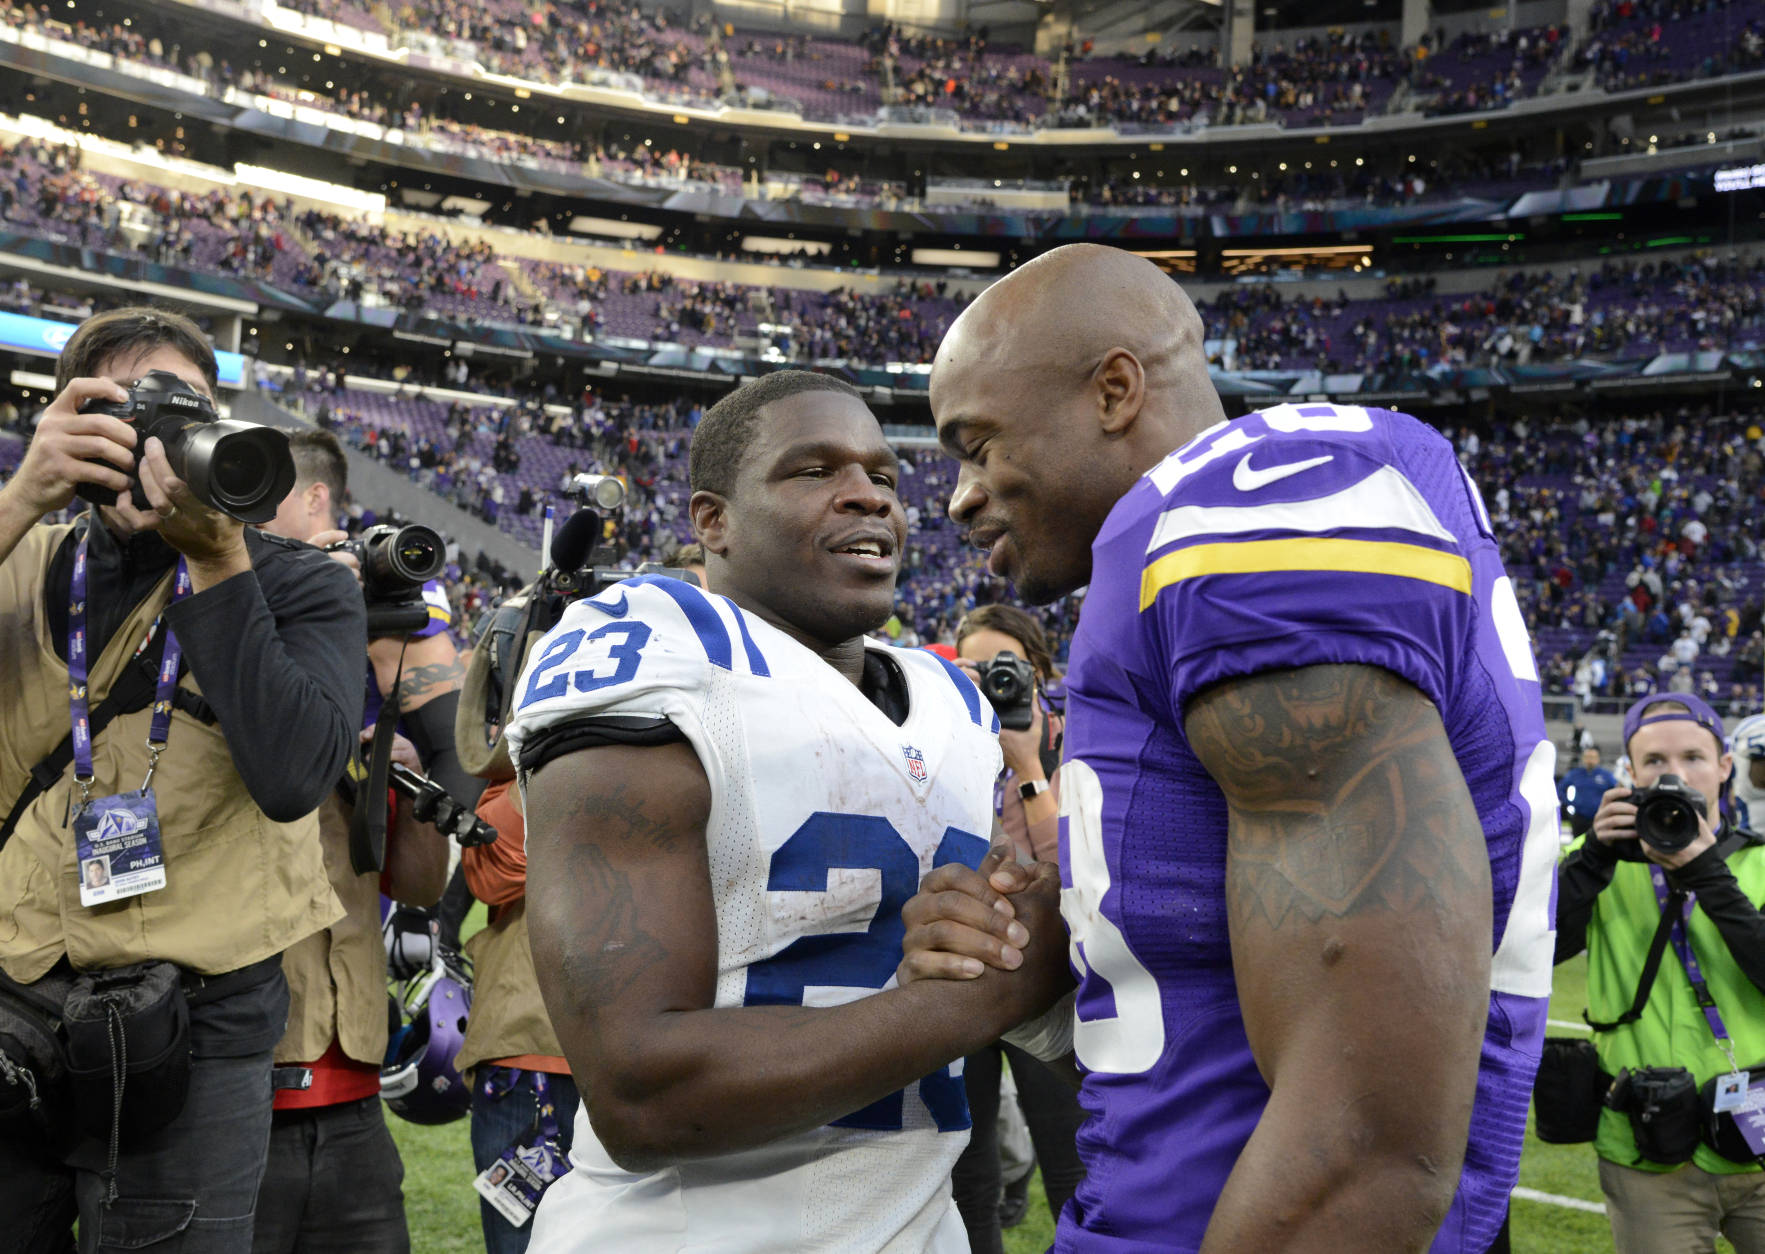 MINNEAPOLIS, MN - DECEMBER 18: Frank Gore #23 of the Indianapolis Colts and Adrian Peterson #28 of the Minnesota Vikings greet each other after the game on December 18, 2016 at US Bank Stadium in Minneapolis, Minnesota. The Colts defeated the Vikings 34-6. (Photo by Hannah Foslien/Getty Images)